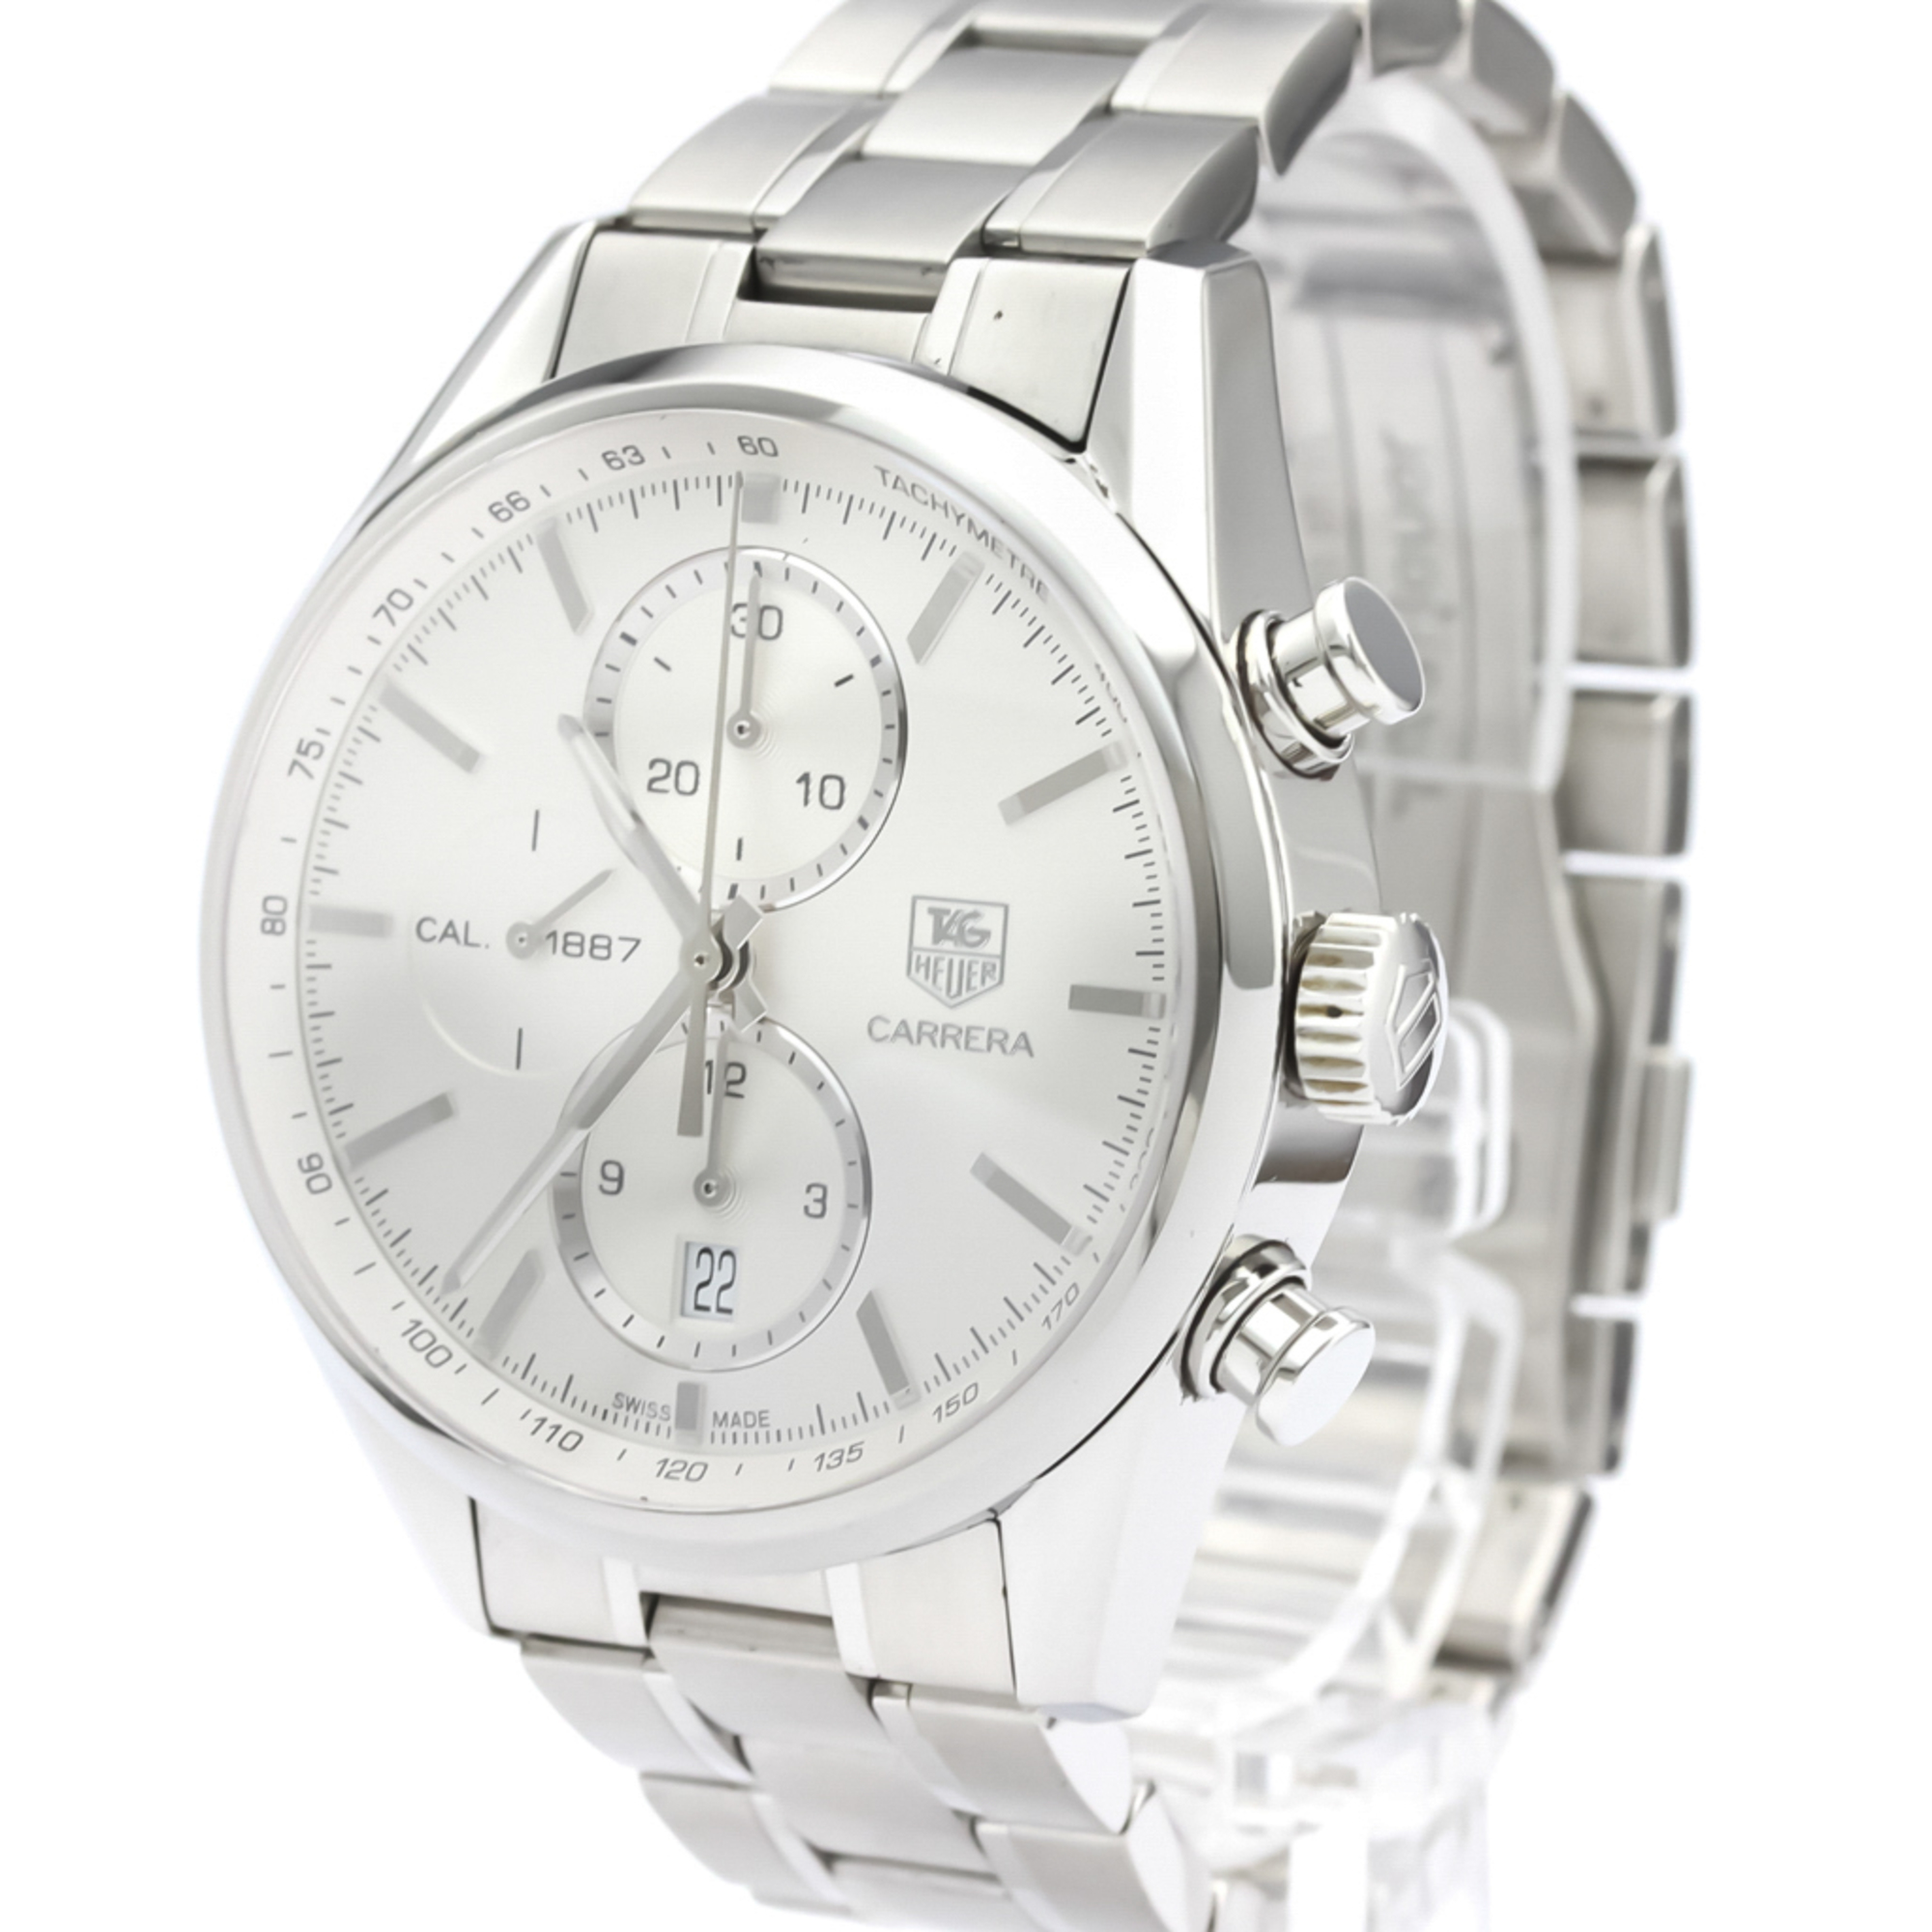 Tag Heuer Carrera Automatic Stainless Steel Men's Sports Watch CAR2111